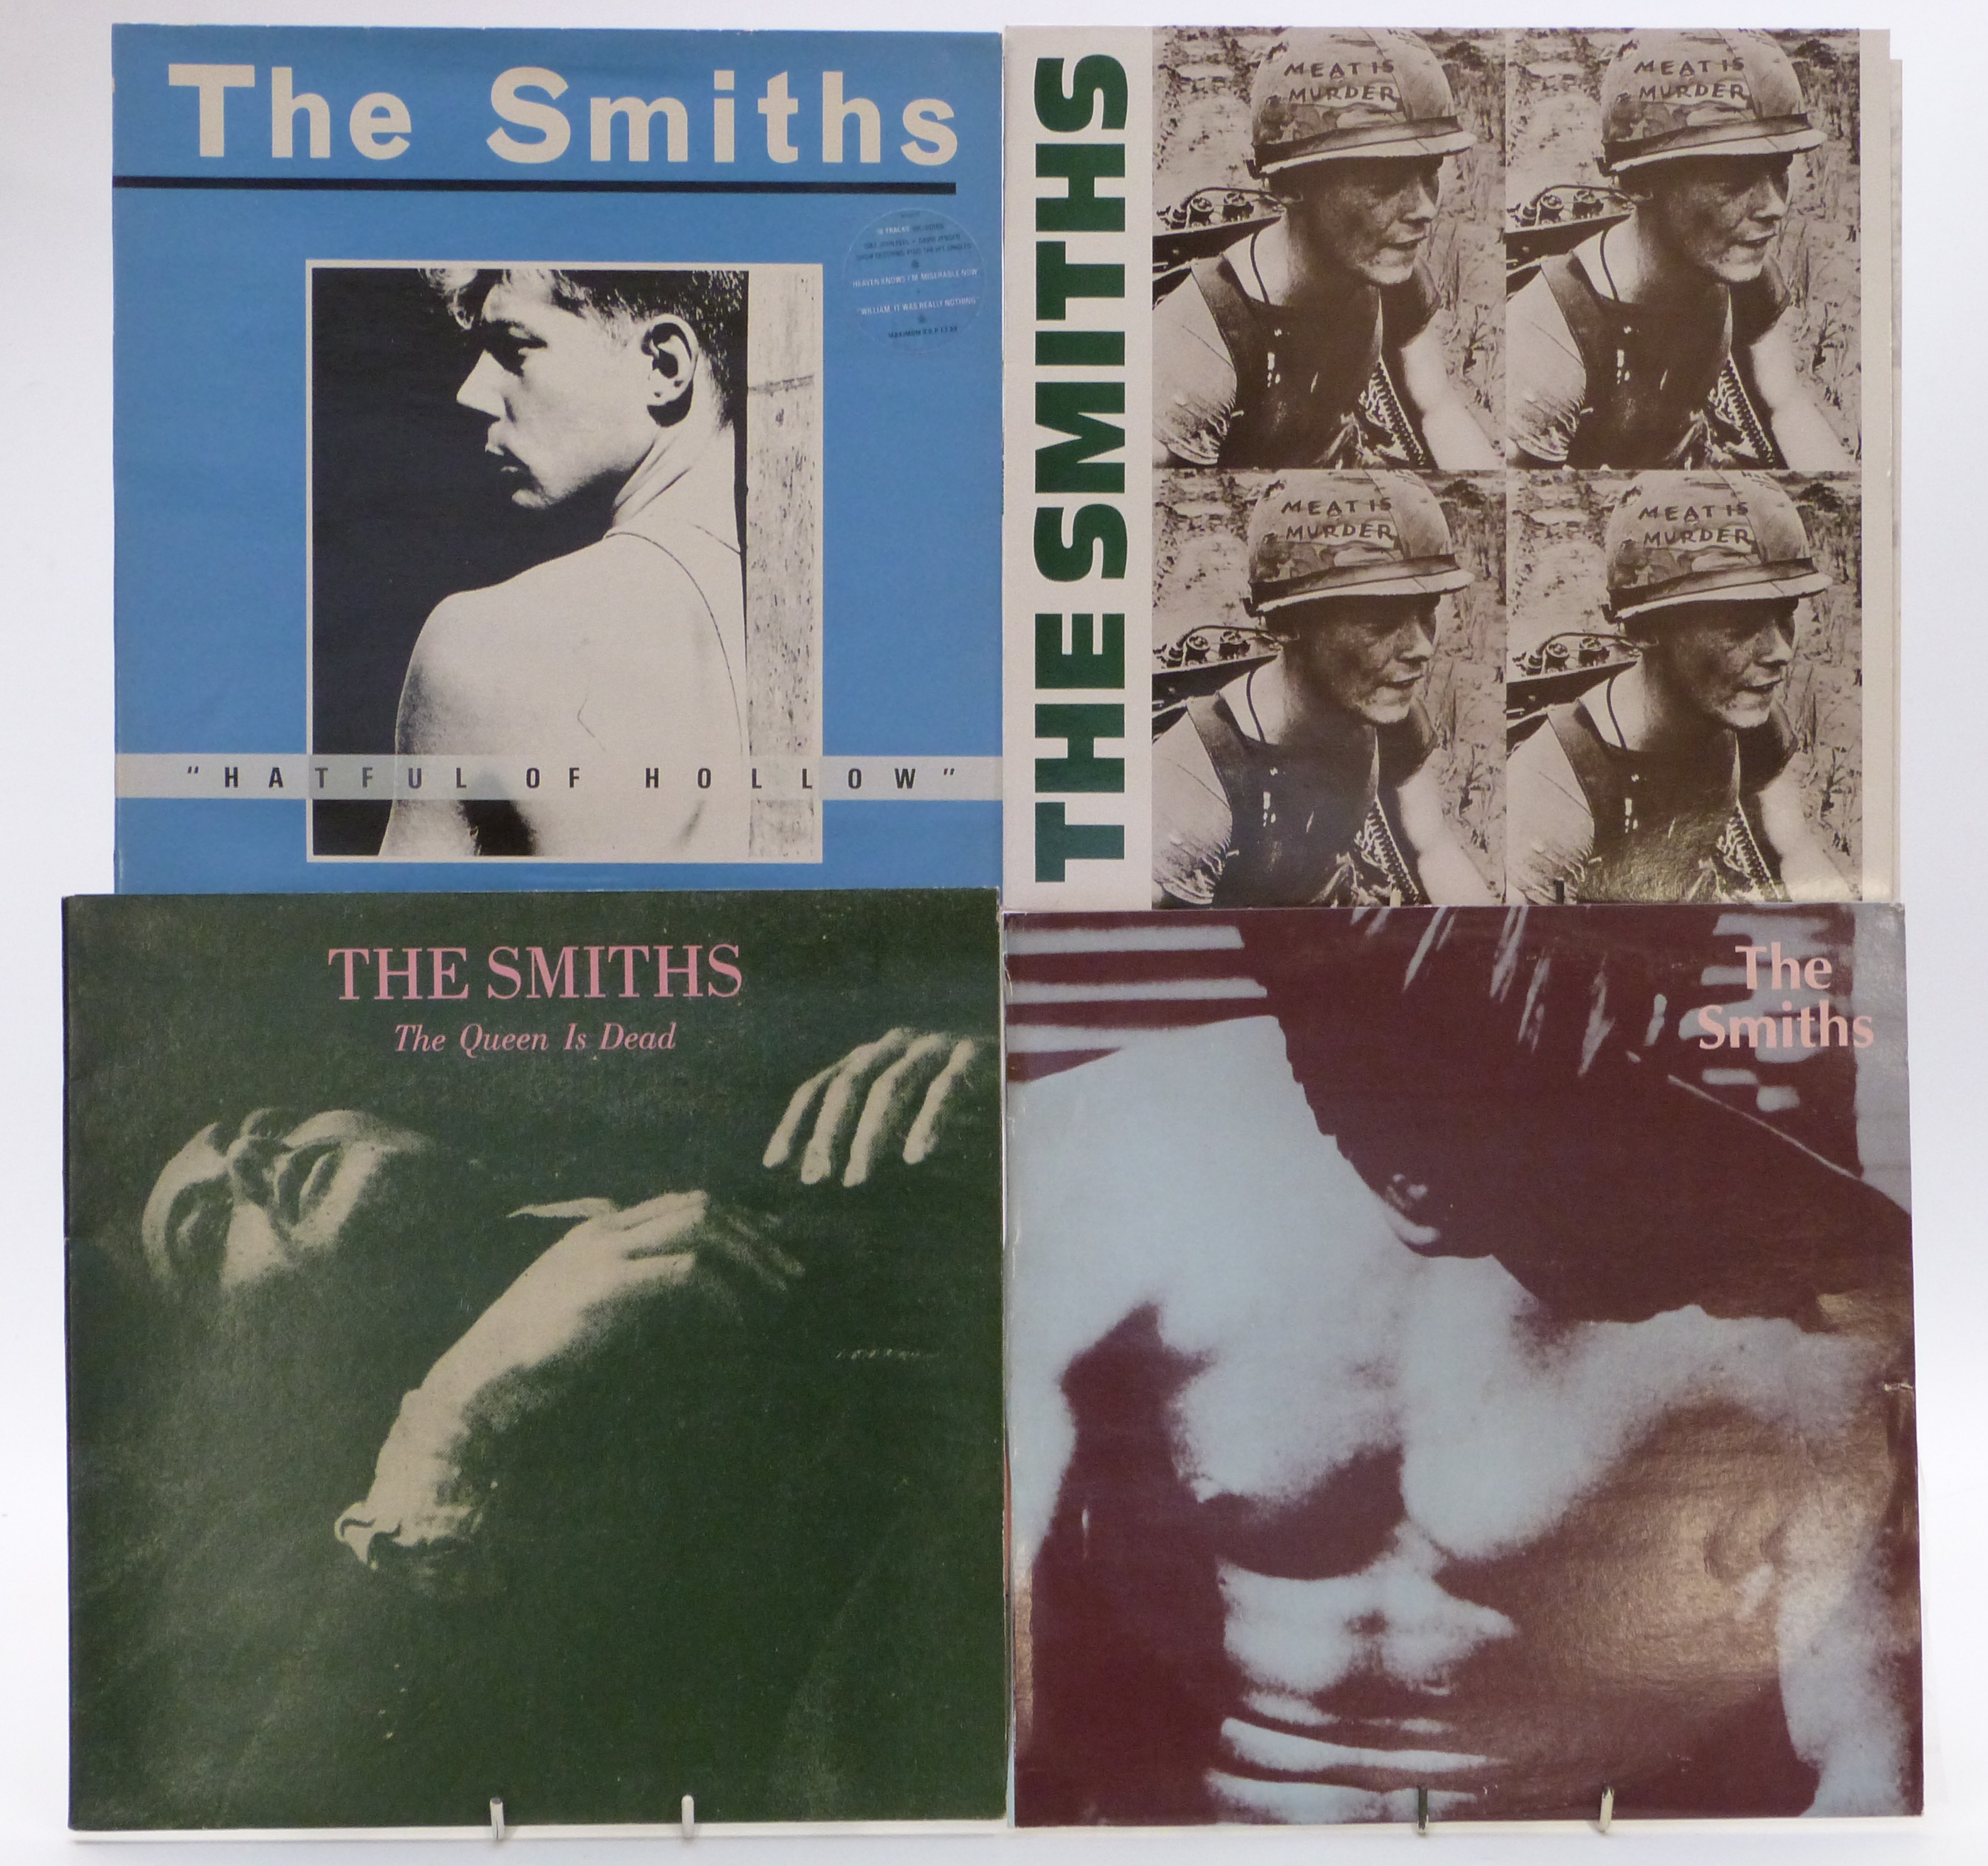 The Smiths - Five albums including The Smiths, Hatful of Hollow, Meat Is Murder, The Queen Is Dead